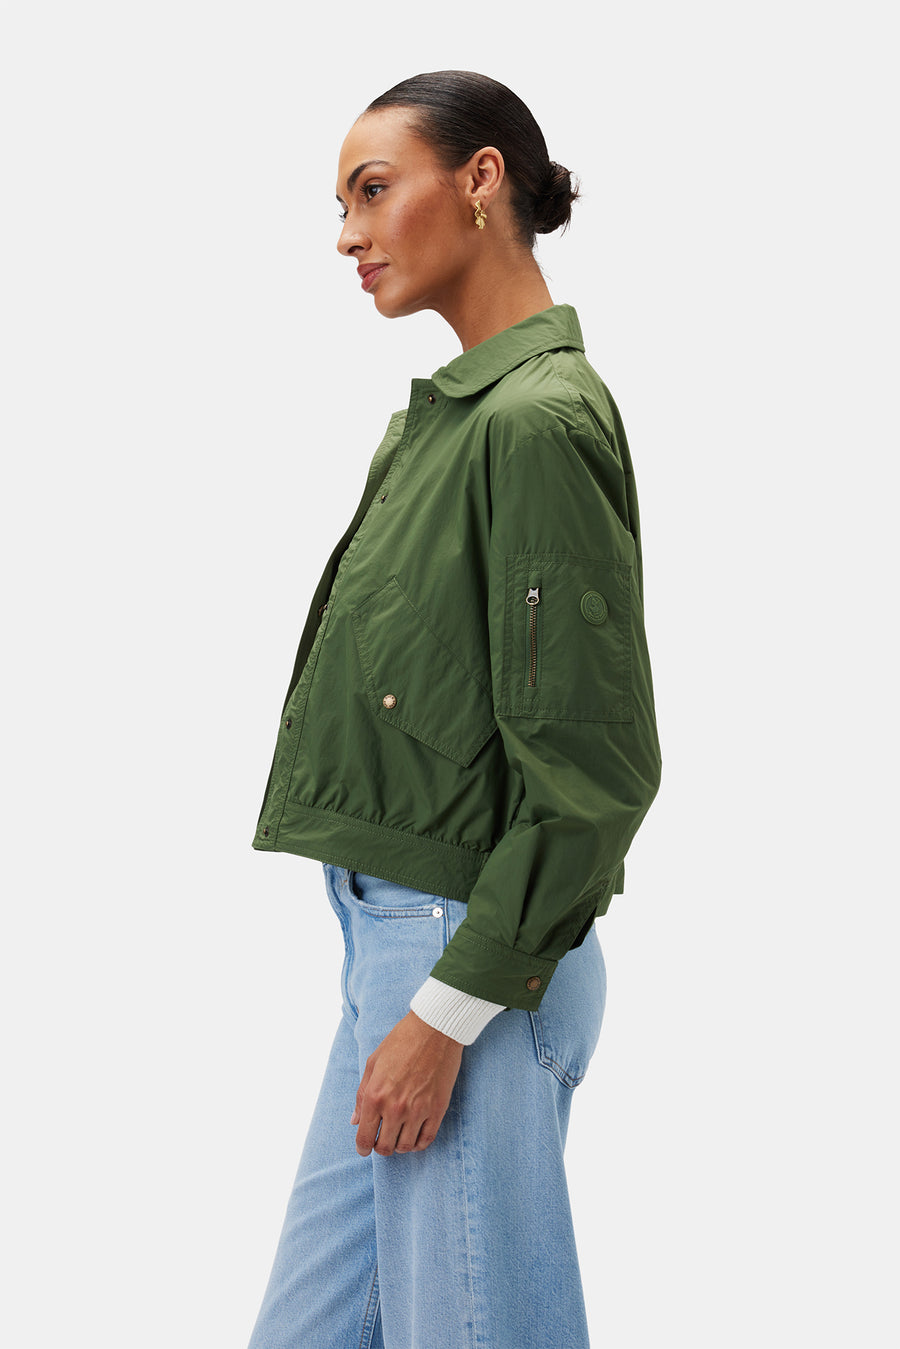 Save the Duck Mila Jacket - Dusty Olive